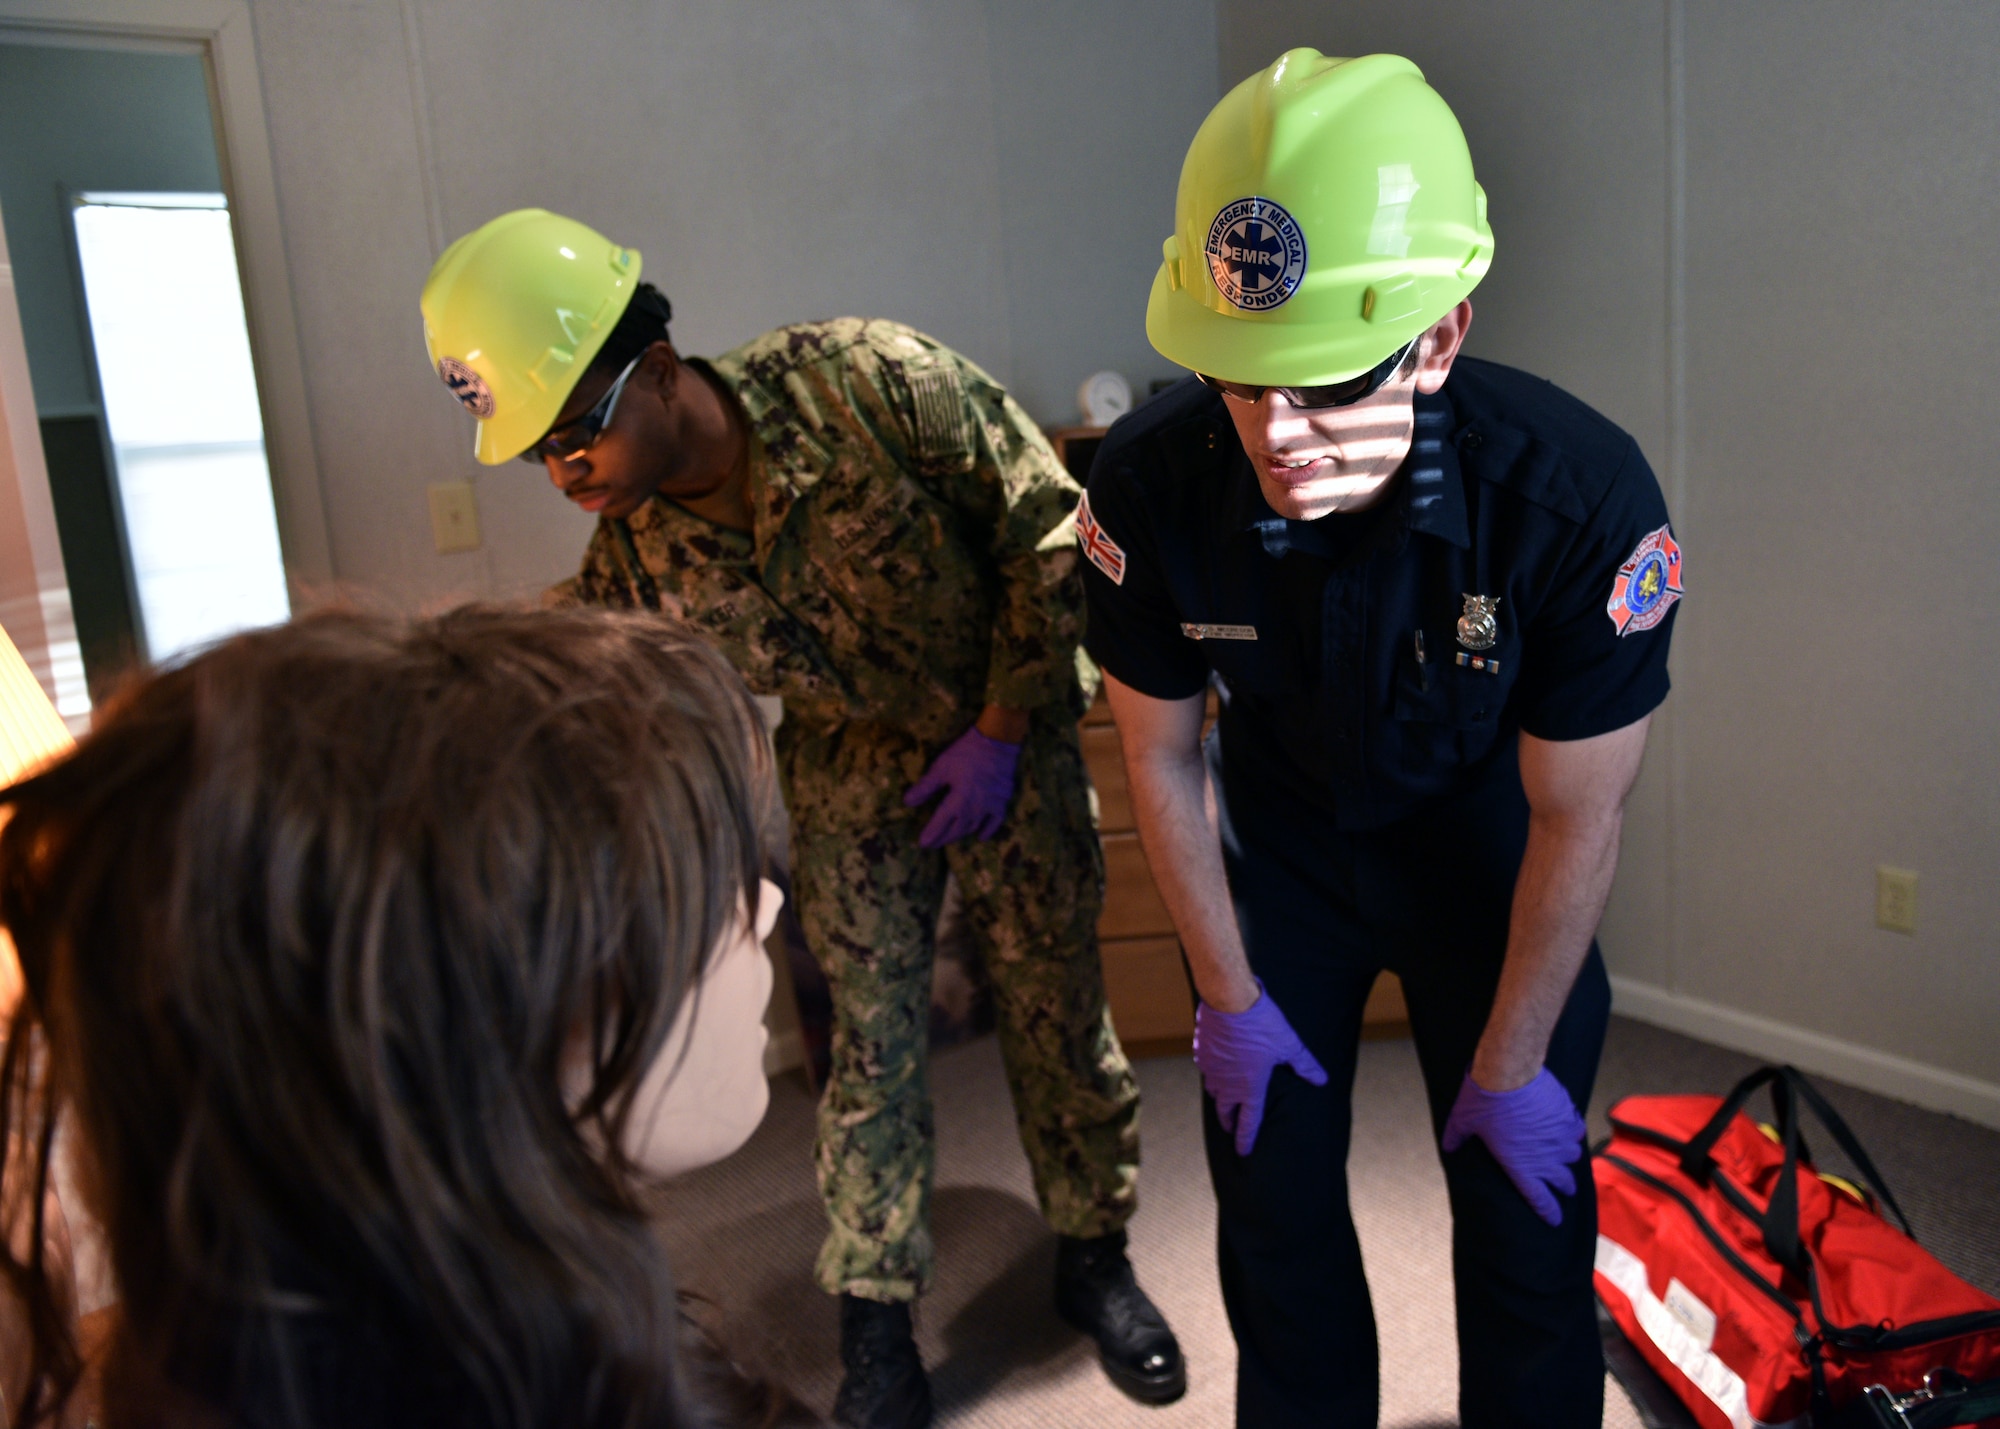 Students from the 312th Training Squadron arrive to a simulated emergency scene during the Emergency Medical Responders course, Jan. 28, 2020, at the Louis F. Garland Department of Defense Fire Academy on Goodfellow Air Force Base, Texas. The EMR course consists of both classroom lecture and hands-on skills training which covers patient assessment, treatment, and use of various medical equipment. (U.S. Air Force photo by Airman 1st Class Robyn Hunsinger)